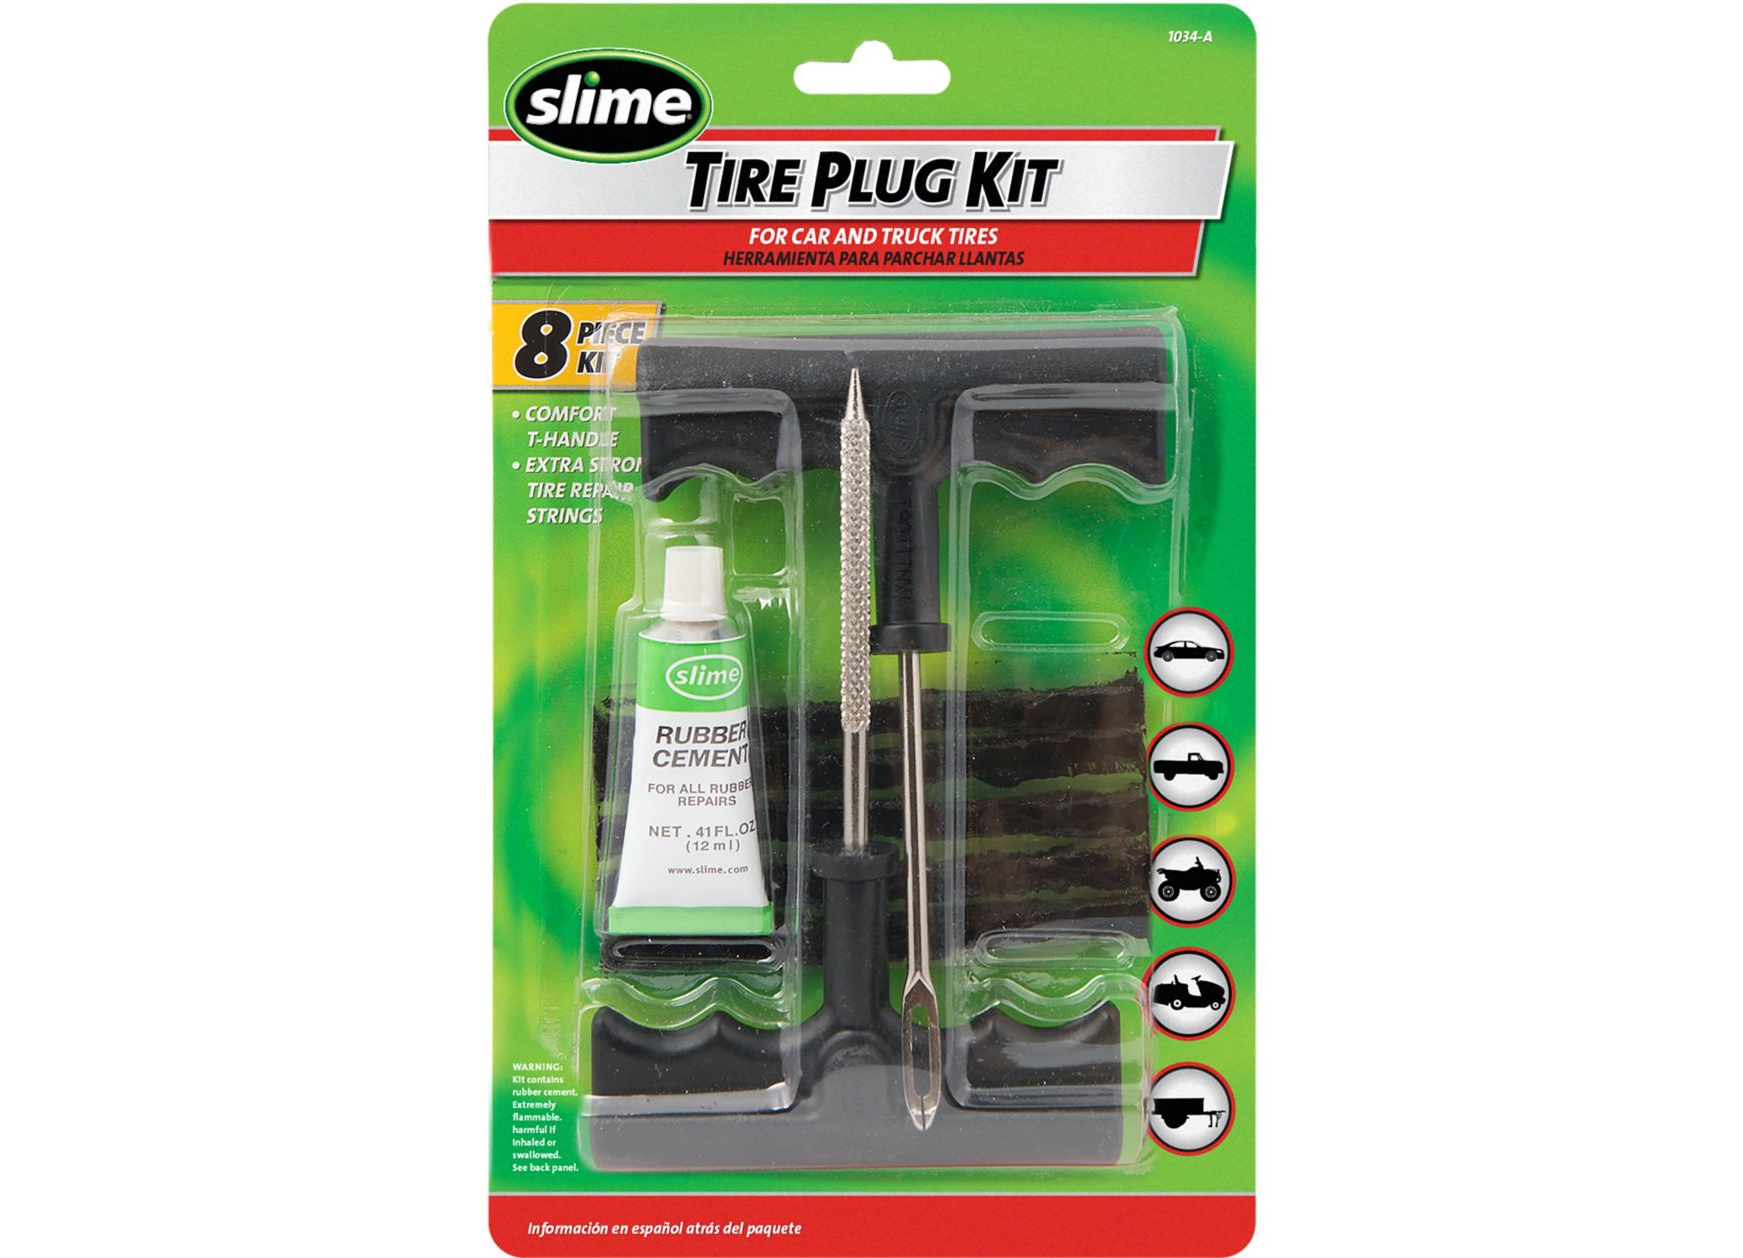 Slime Classic Tire Repair Kit 20189, 24 Patches